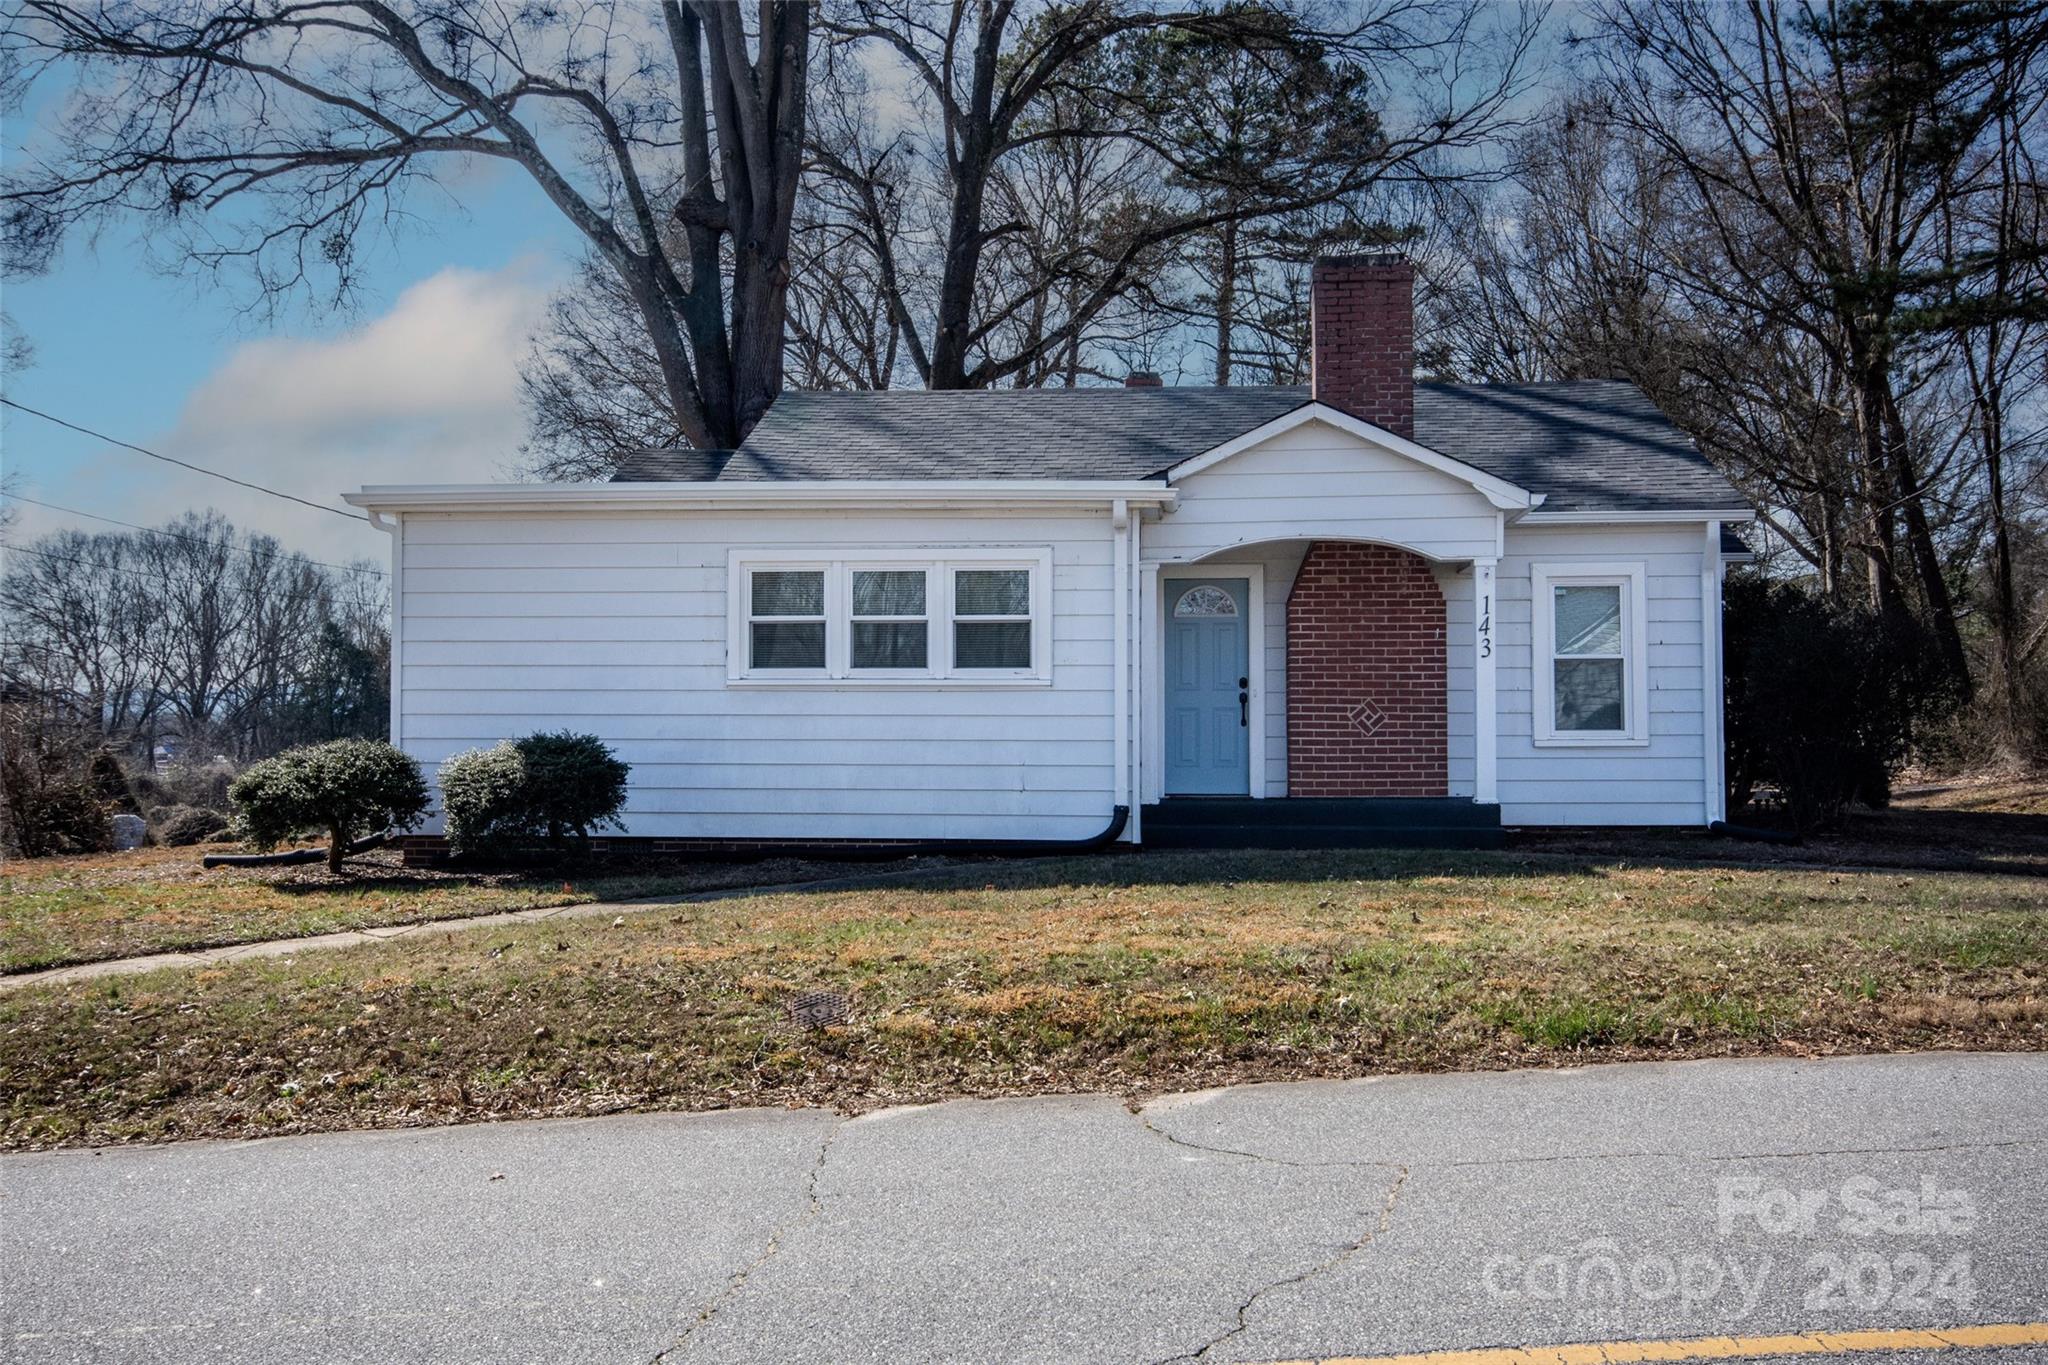 Photo one of 143 7Th Nw St Taylorsville NC 28681 | MLS 4111485